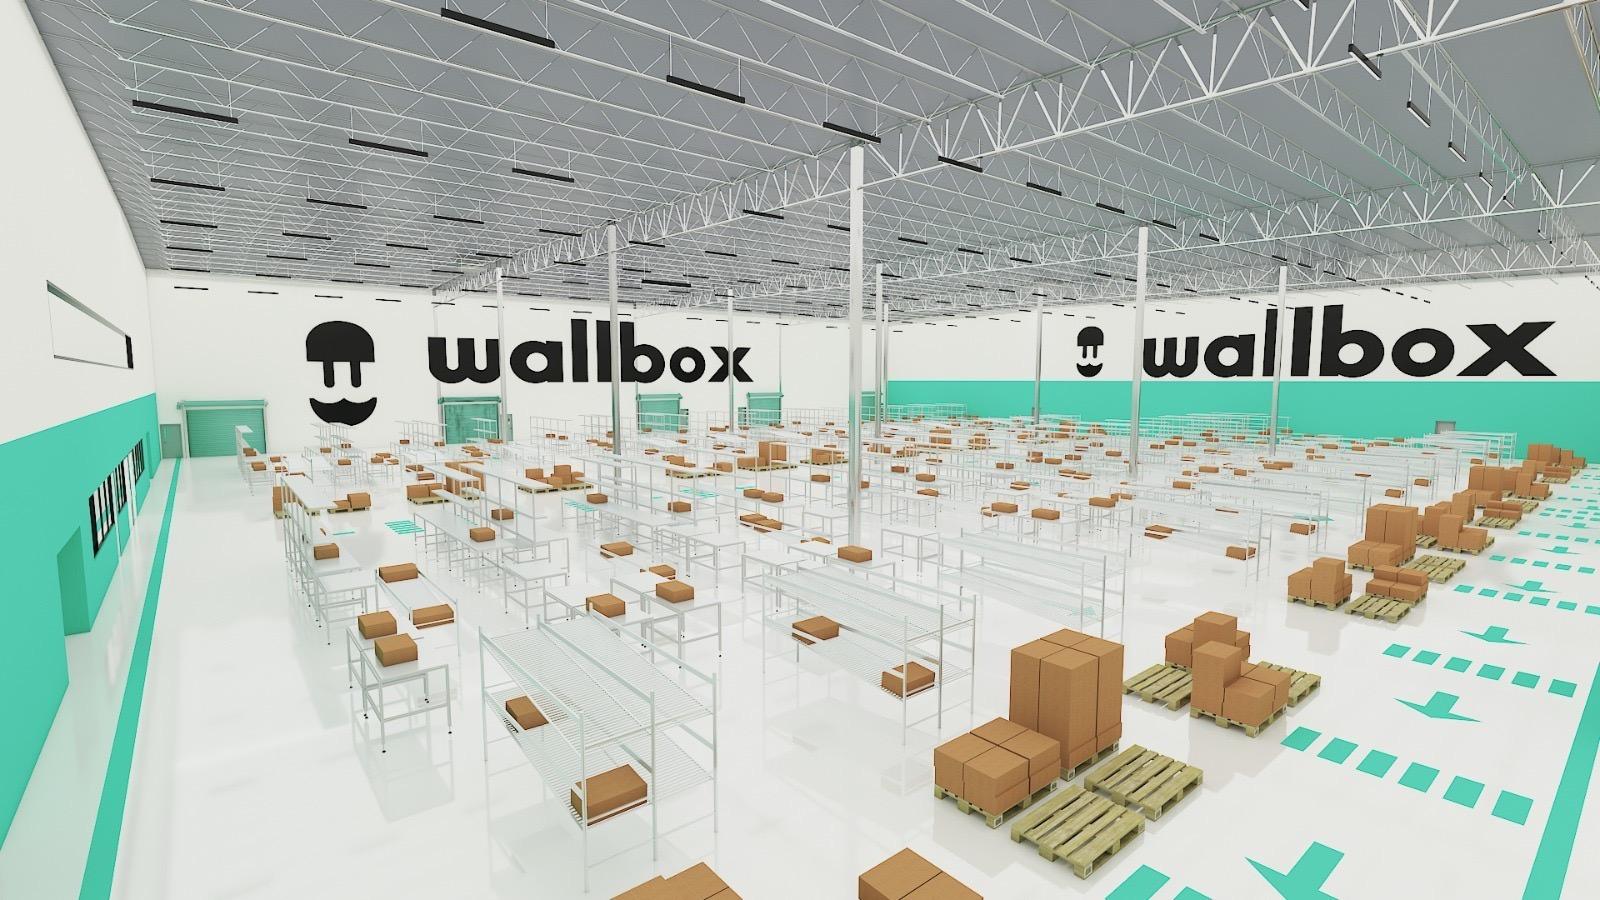 Wallbox enters first phase of Build-out for its U.S. EV charger manufacturing facility